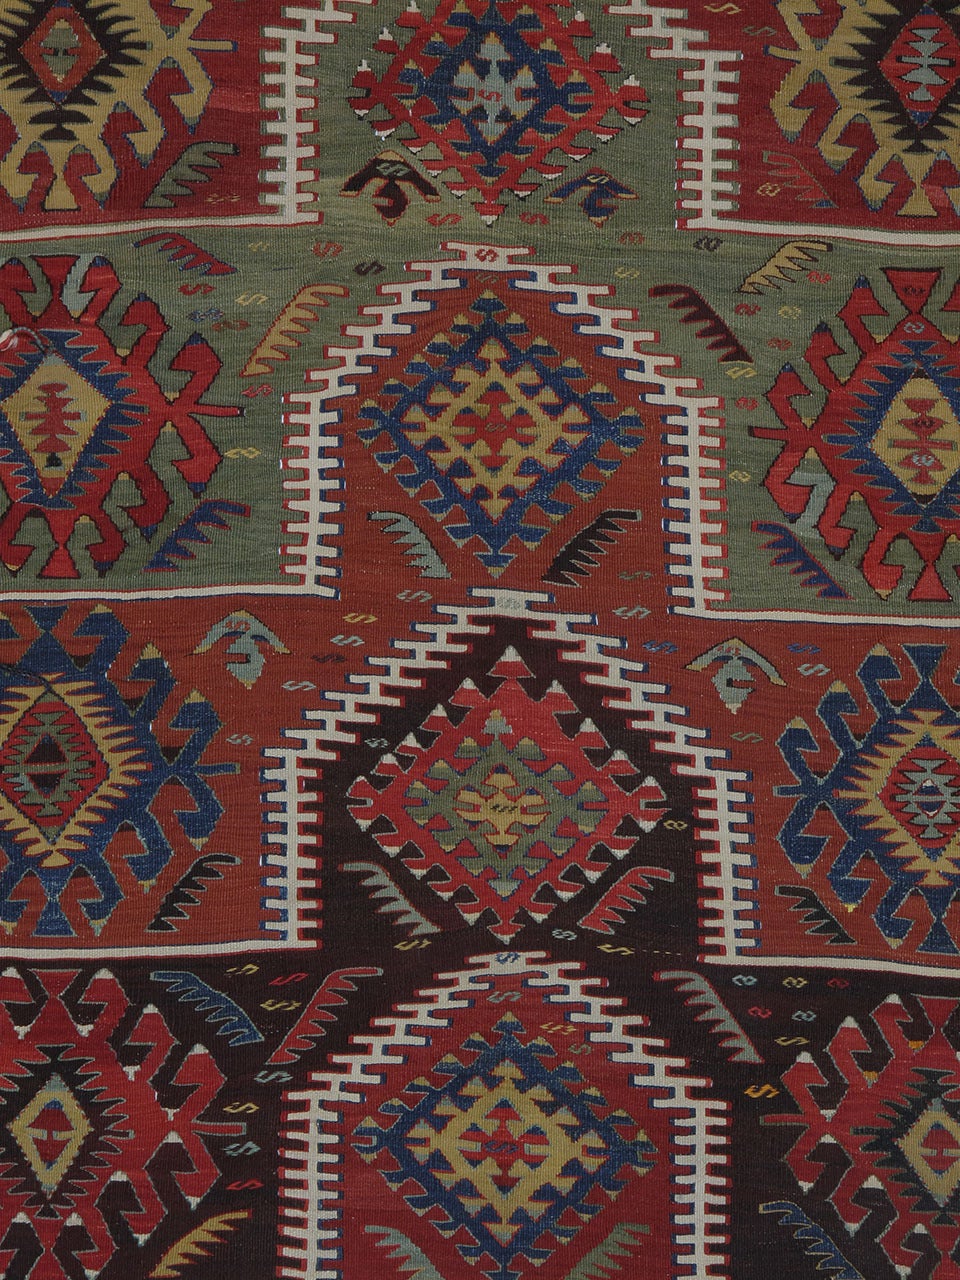 Kilim Rug with ascending arches. A beautiful example of Anatolian Kilim rug weaving tradition from West-Central Turkey, displaying a well-known design of stacked arches, often assumed to be a prayer rug variant, but probably with a more archaic